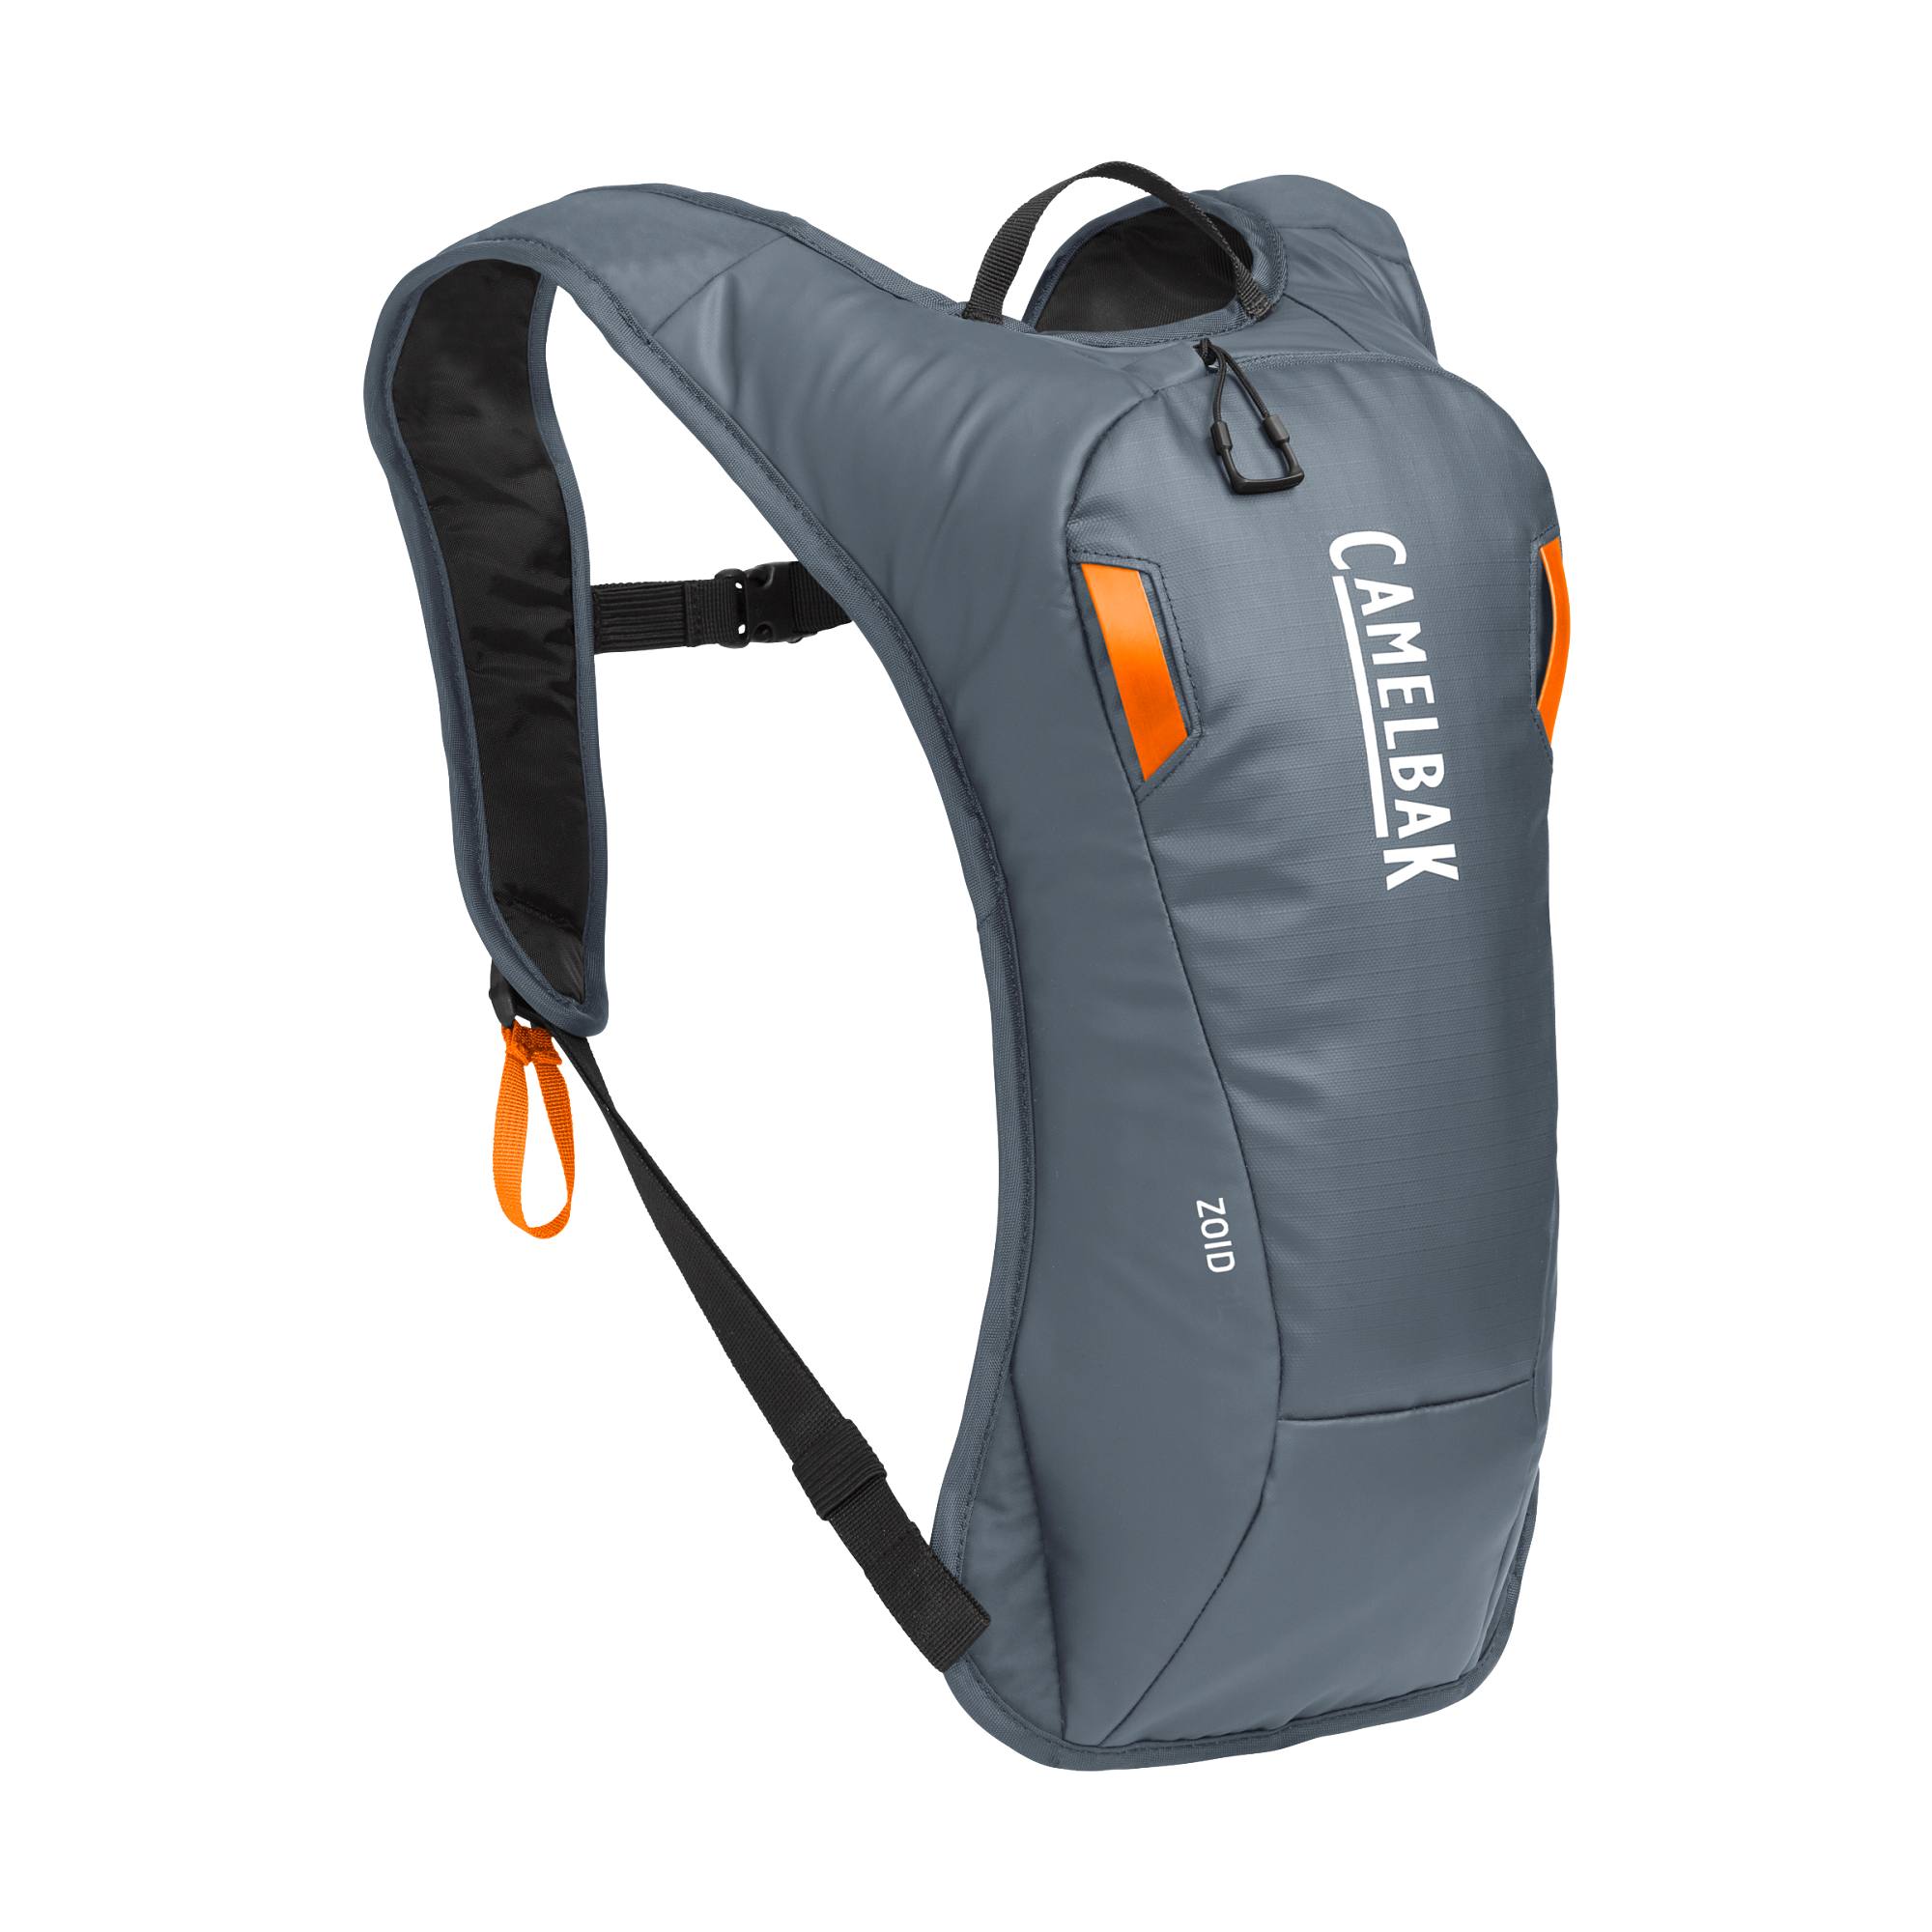 Zoid™ Hydration Pack